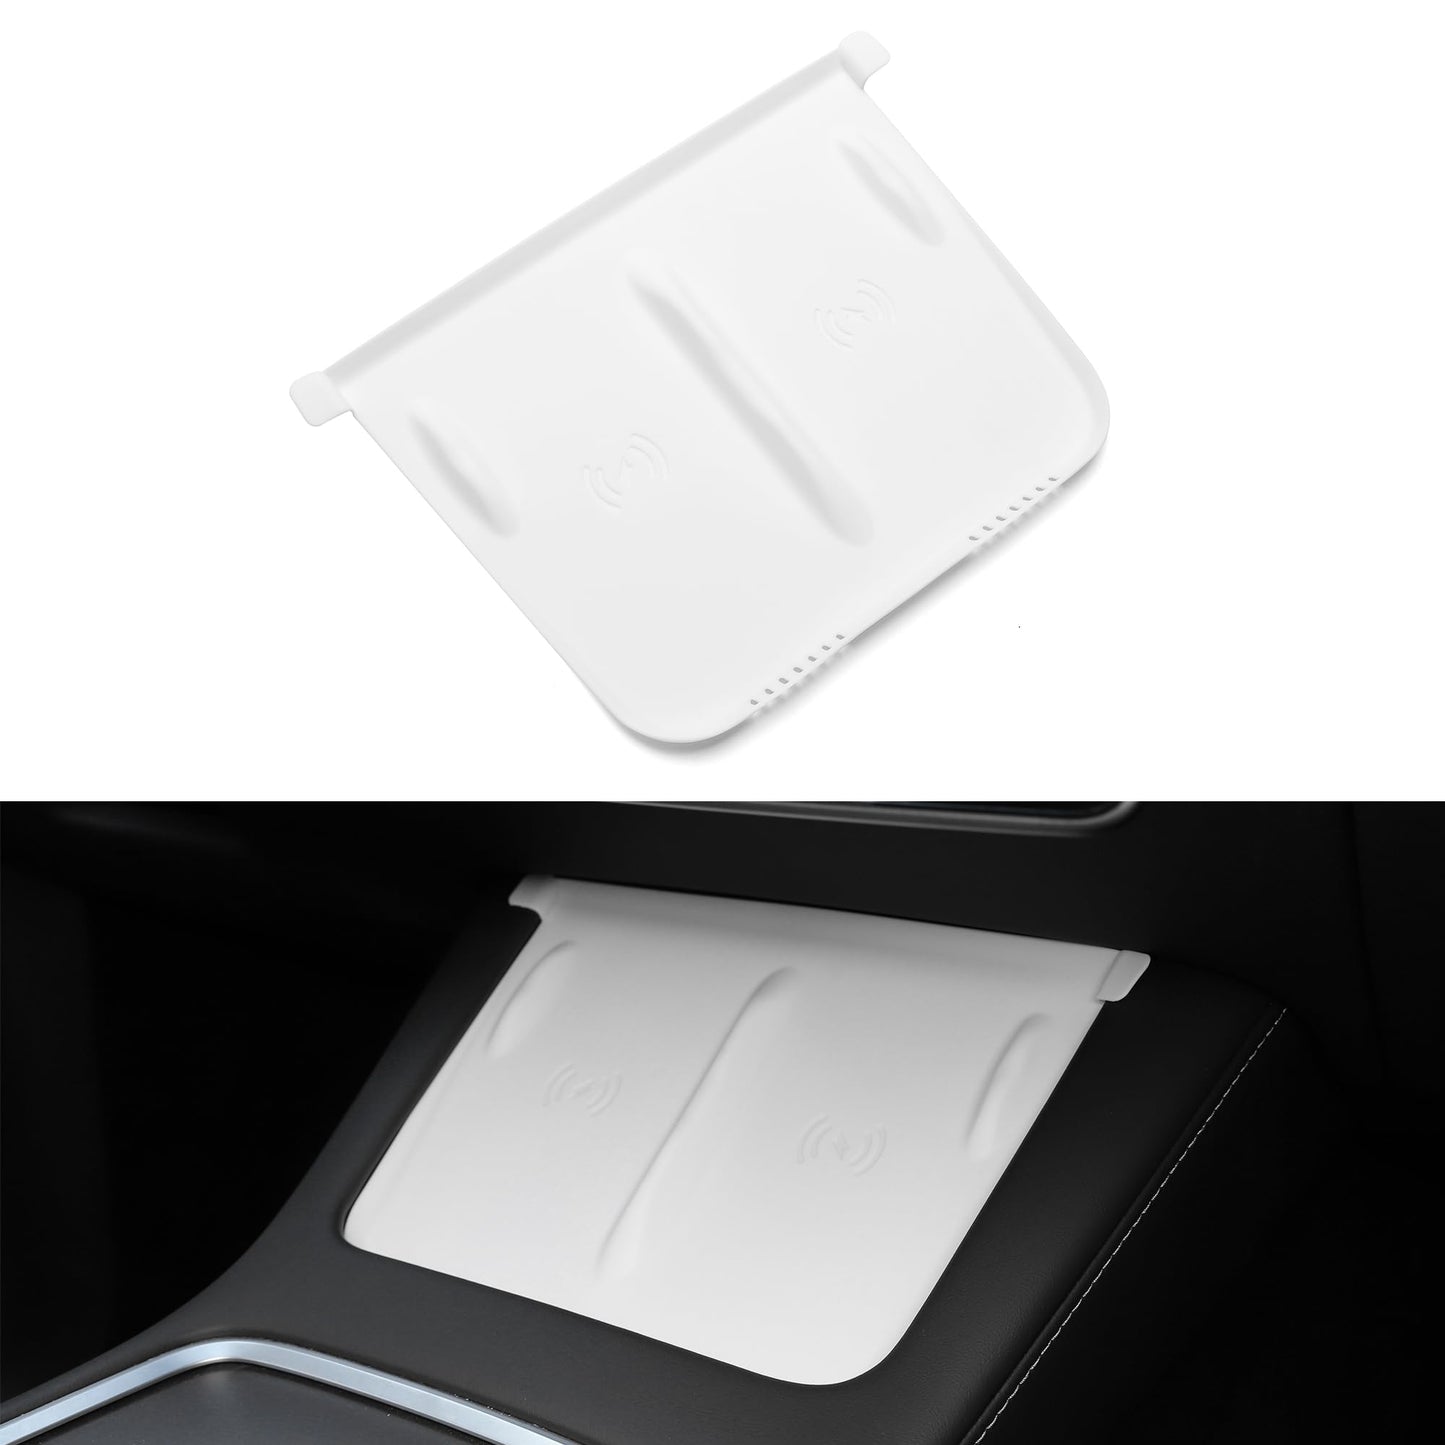 TOPABYTE Center Console Accessories Set - Cup Holder, Screen Edge Protector, Wireless Charger Mat Silicone For Model 3/Highland/Y